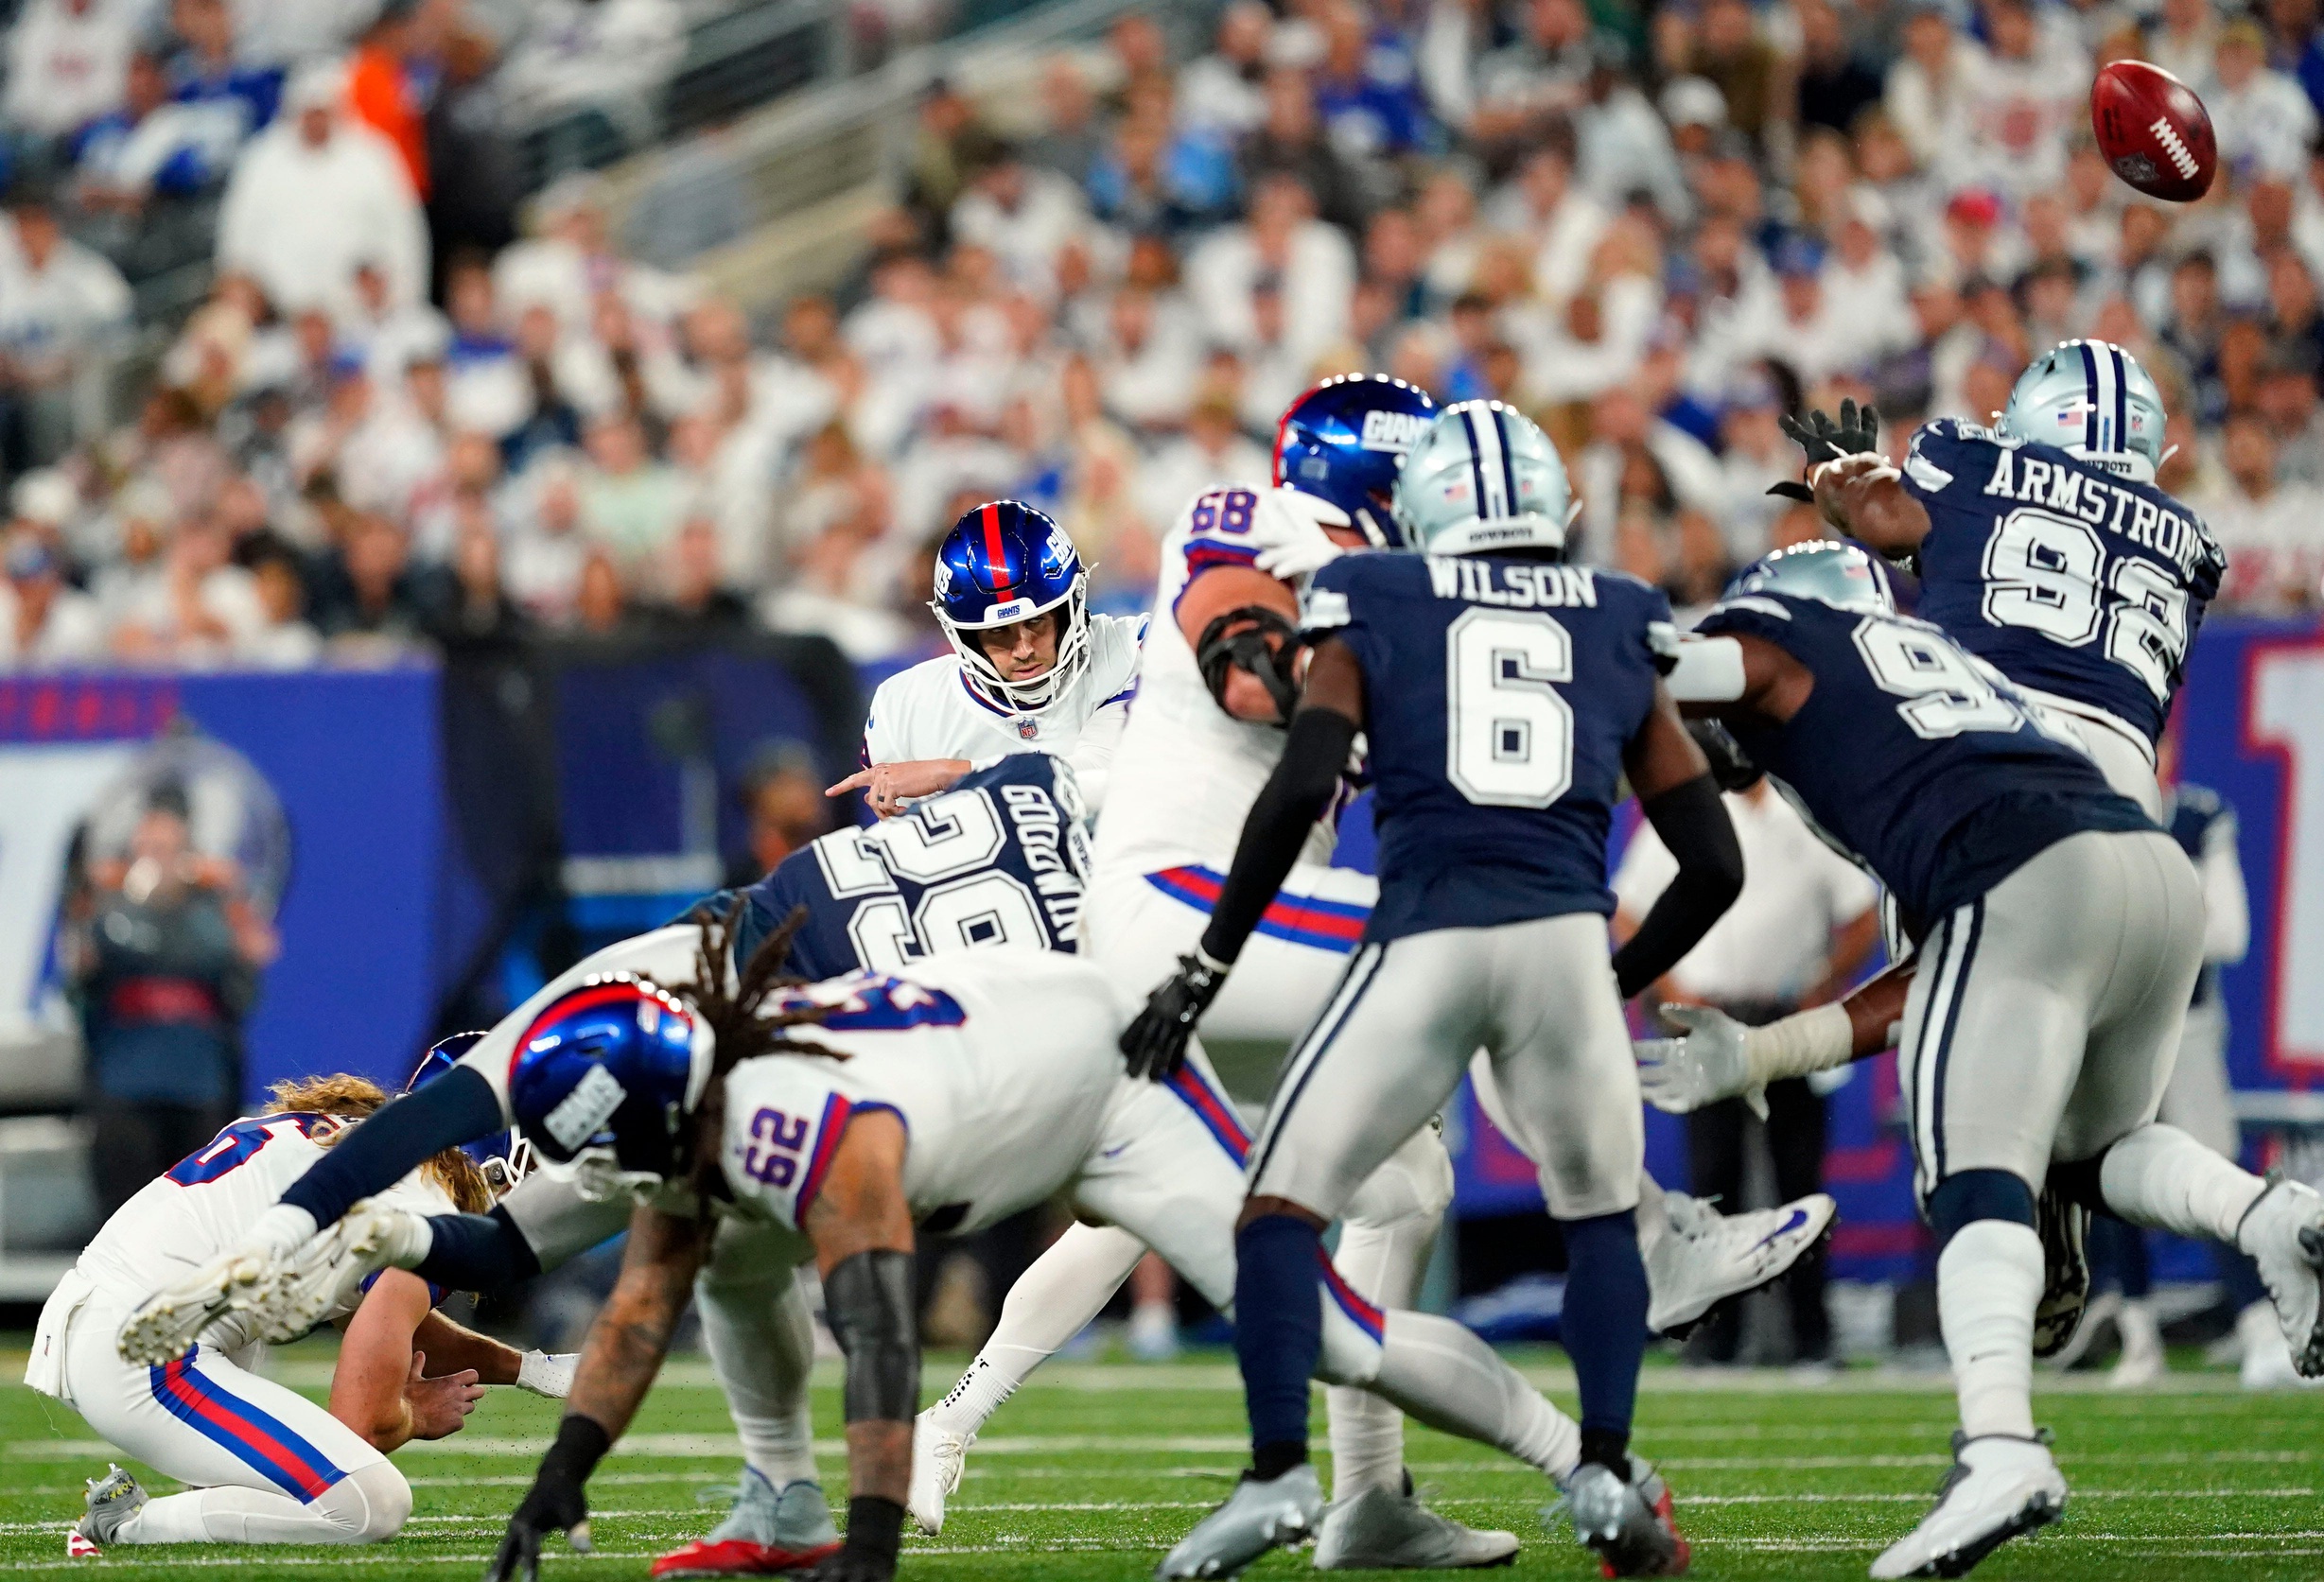 Five Stats That Mattered in Giants’ Loss to Cowboys